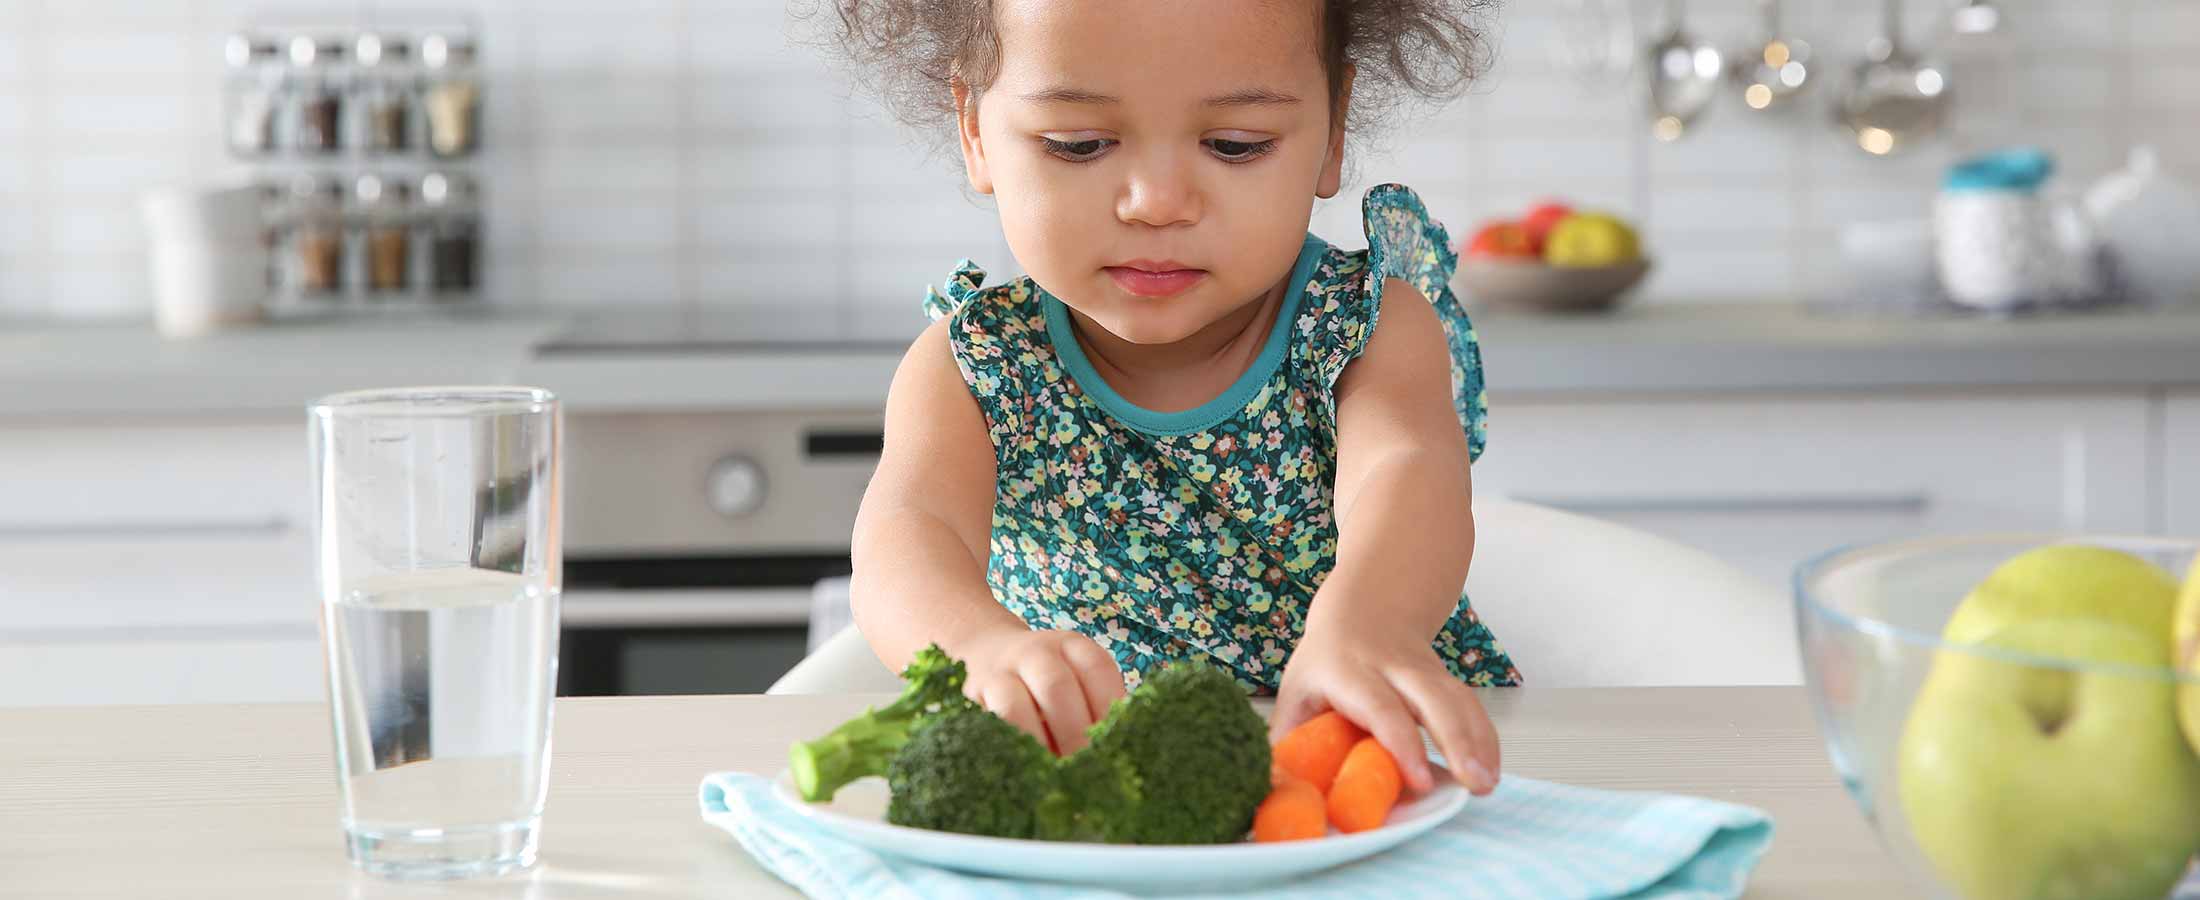 little girl sitting with water glass and veggies